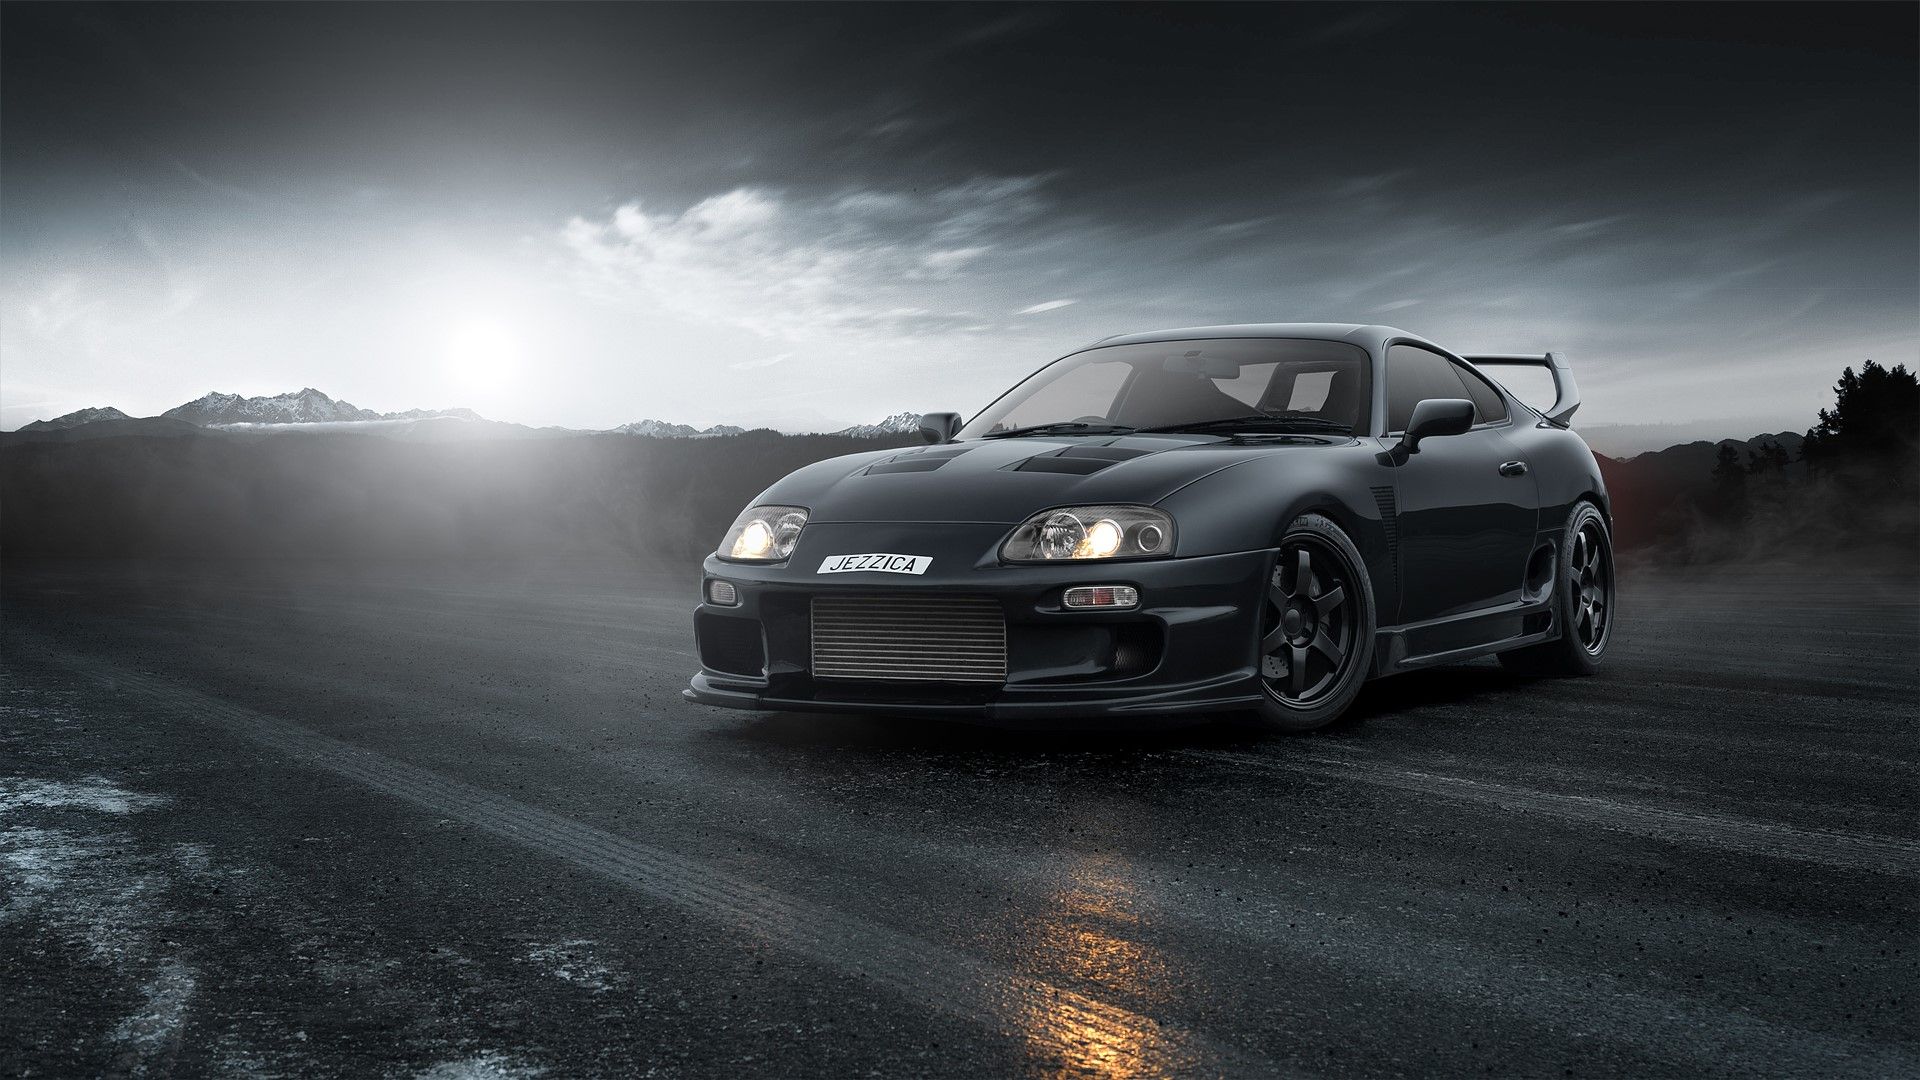 Toyota Supra on the road - JDM, cars